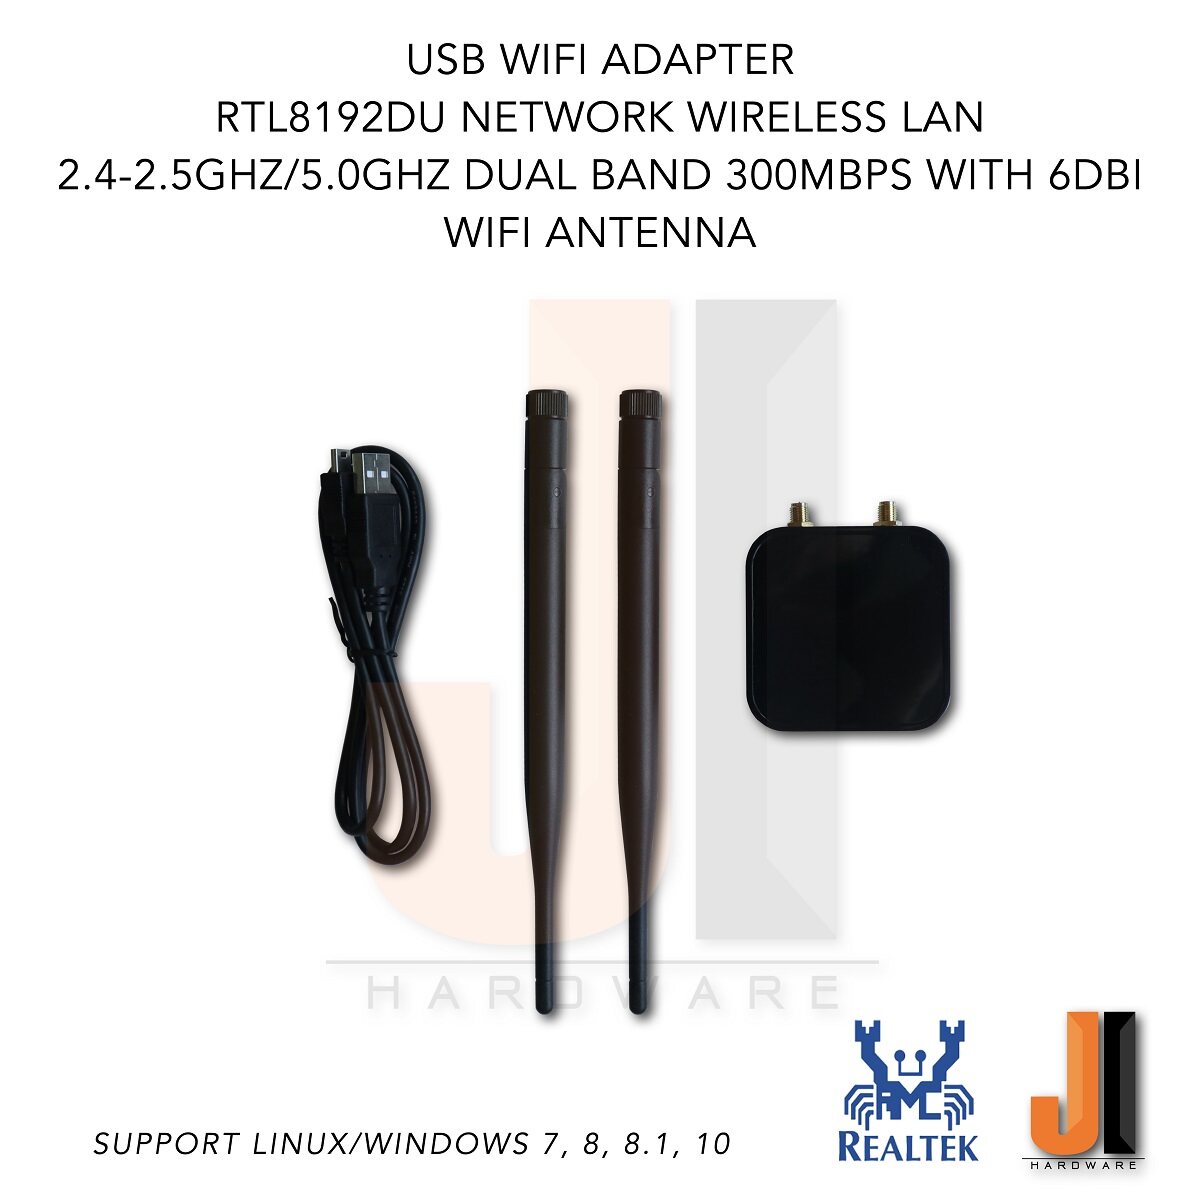 Usb Wi-Fi Adapter Rtl8192du Network Lan Dual Band (2.4 Ghz / 5.0 Ghz) 300 Mbps With 6 Dbi Wi-Fi Antenna (new). 